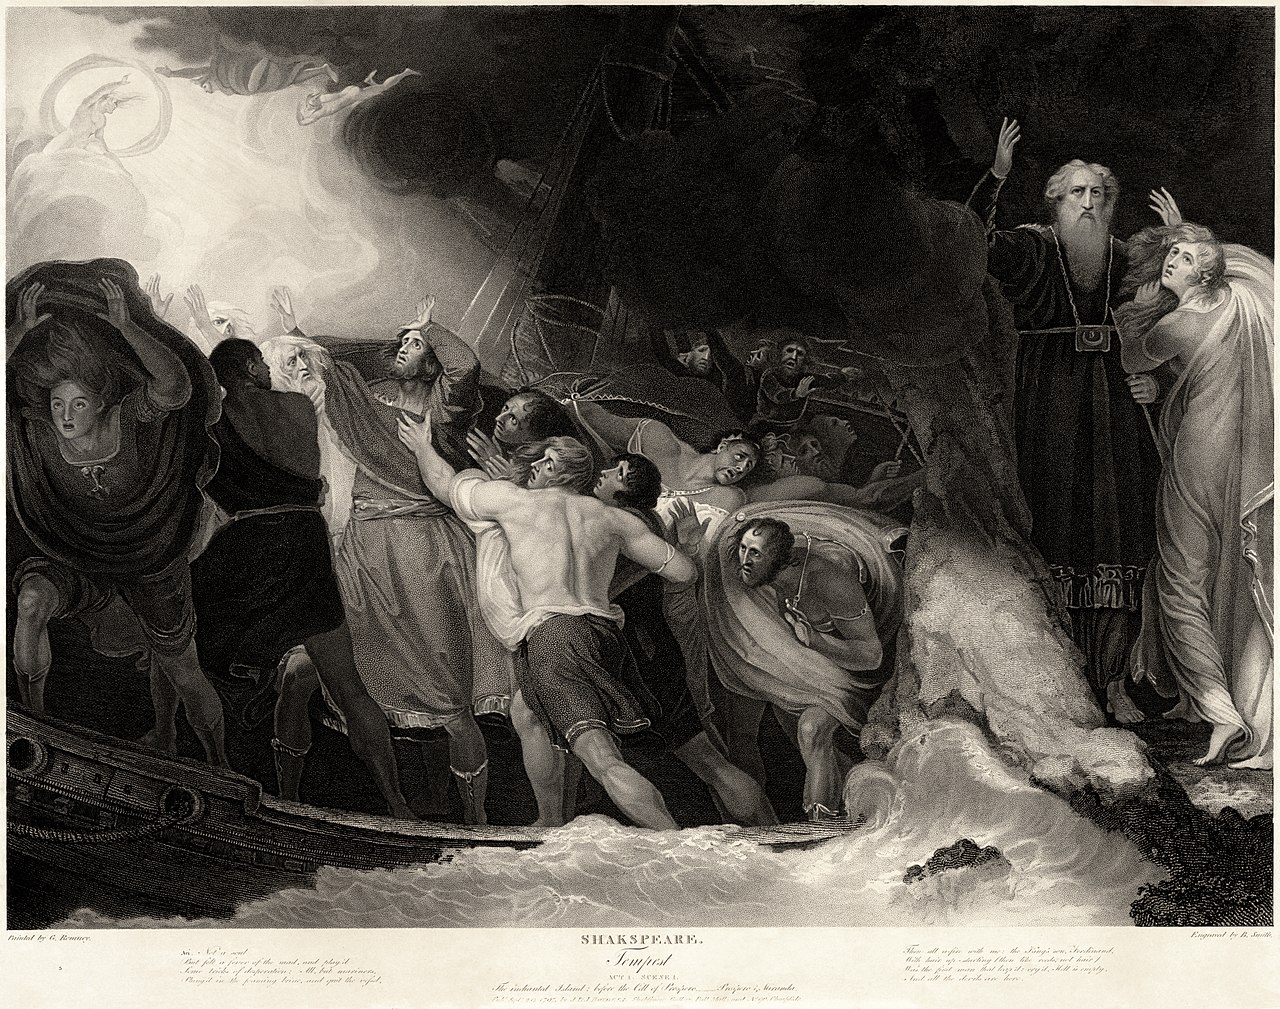 Opening Scene of The Tempest - Summary